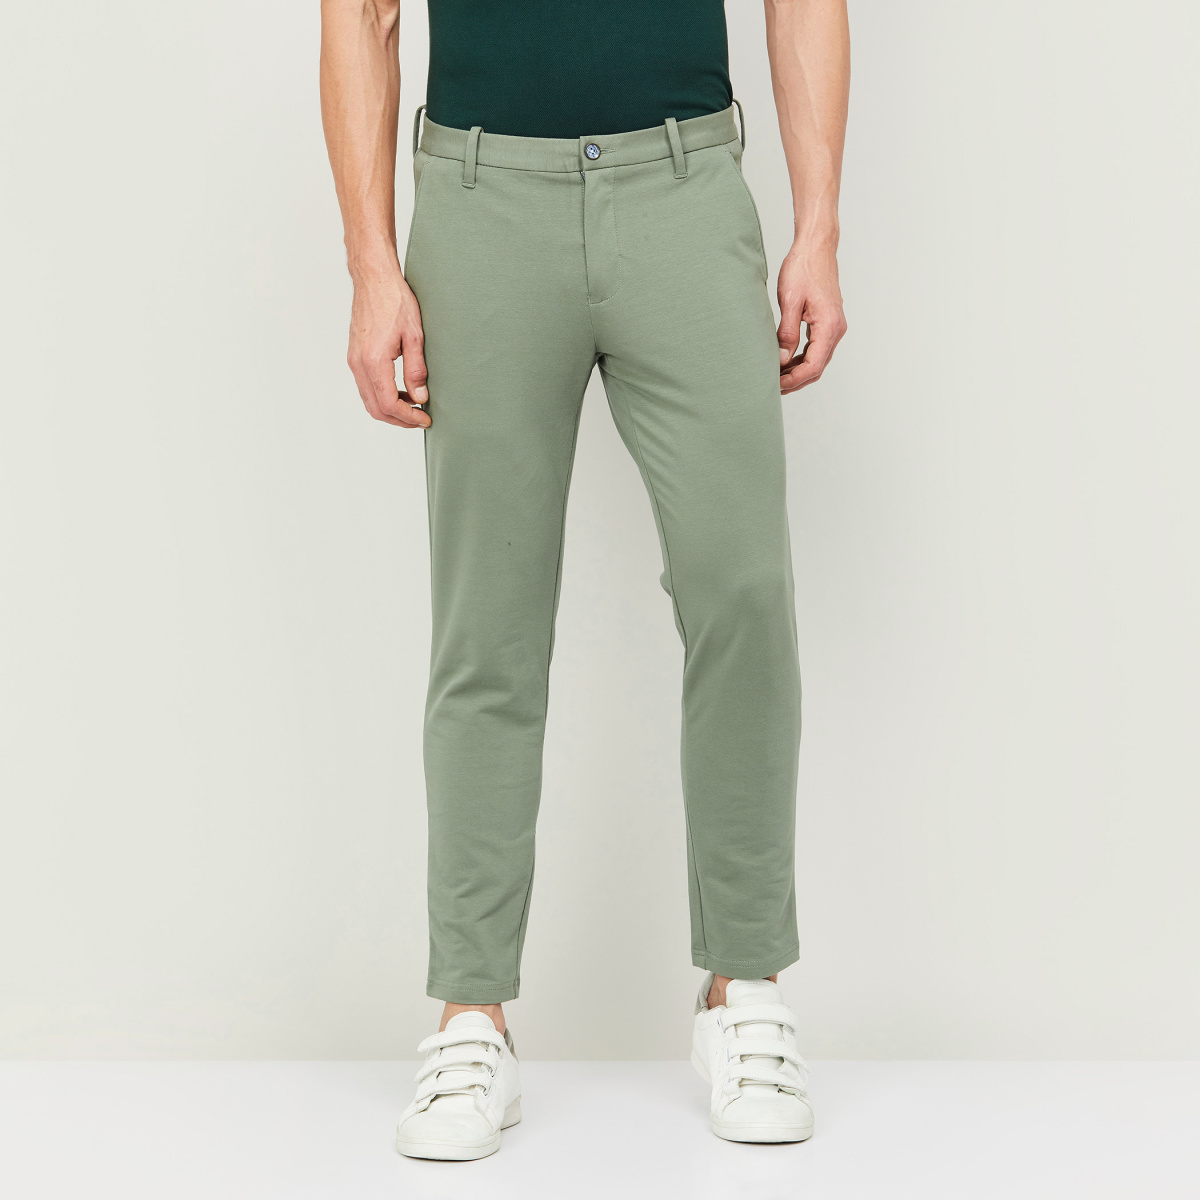 Tailored trousers - Lime green - Ladies | H&M